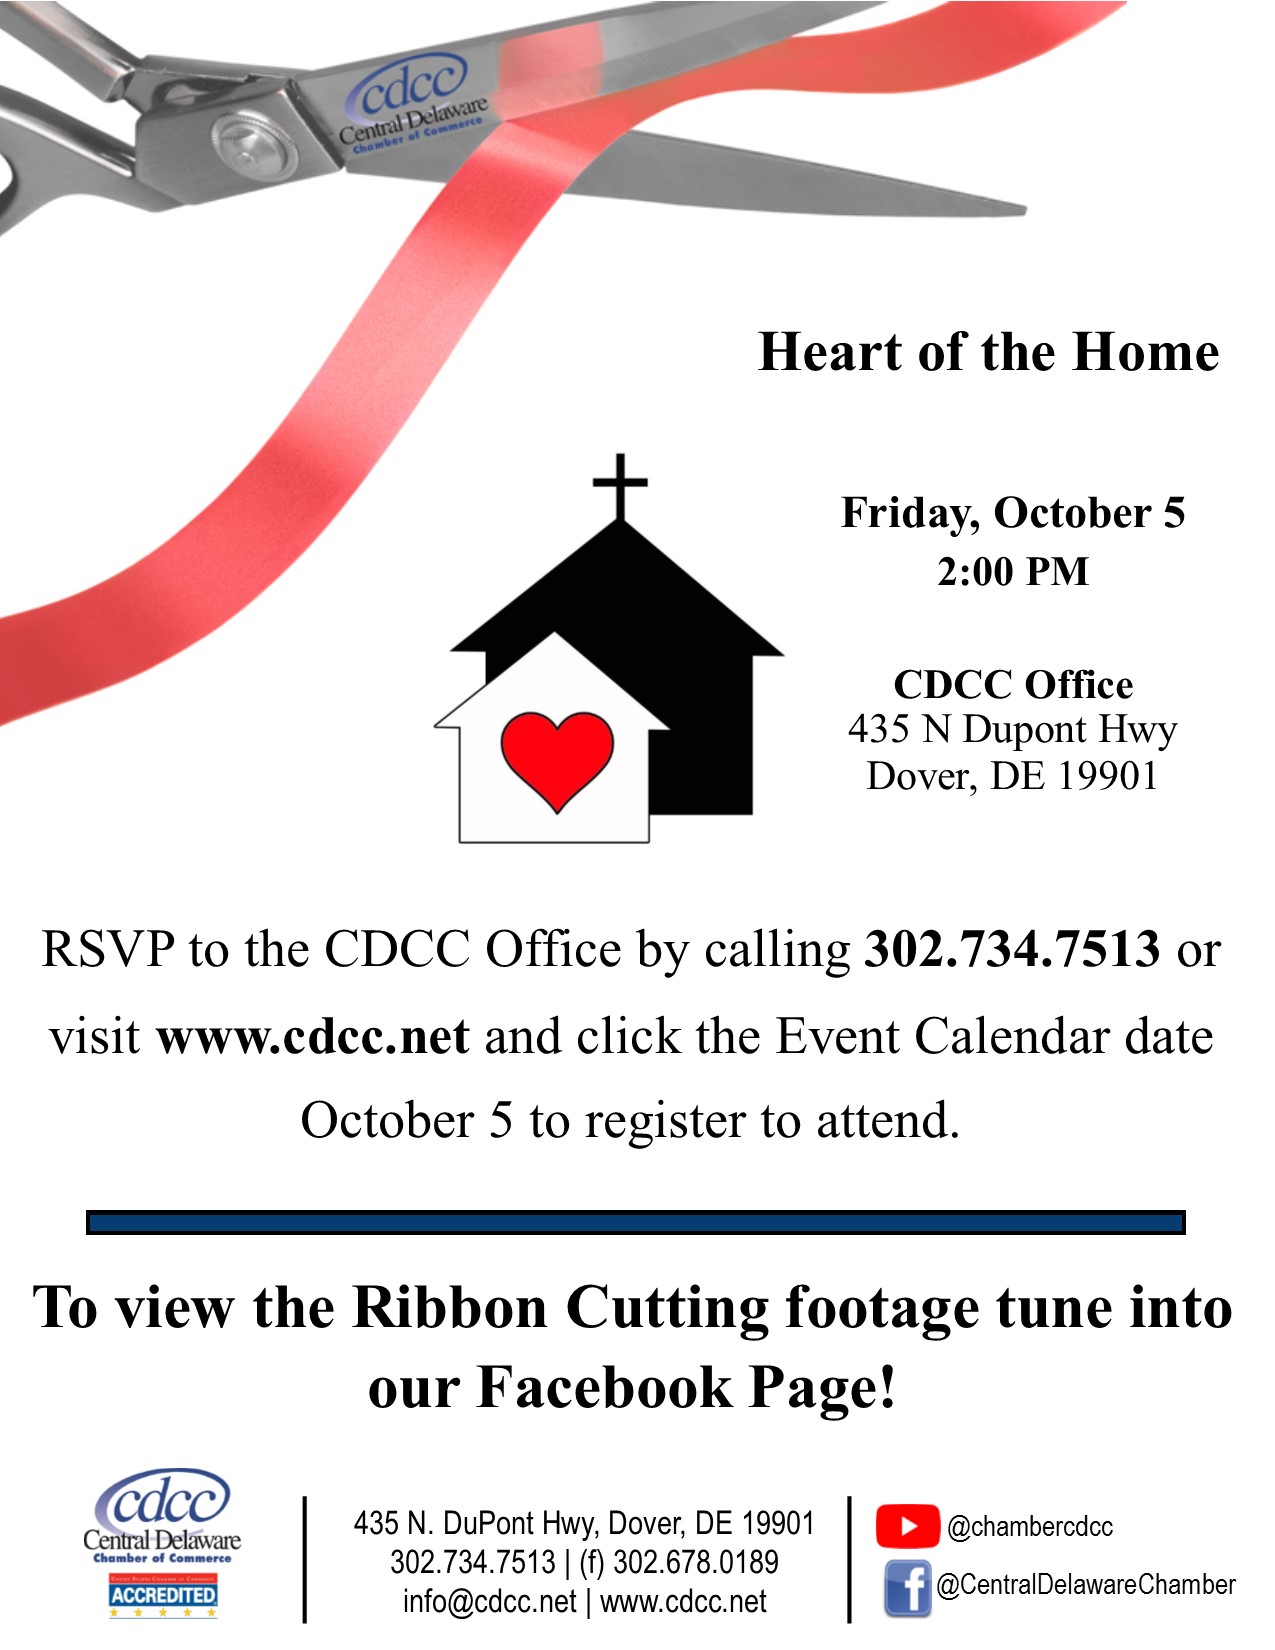 Ribbon Cutting - Heart of the Home